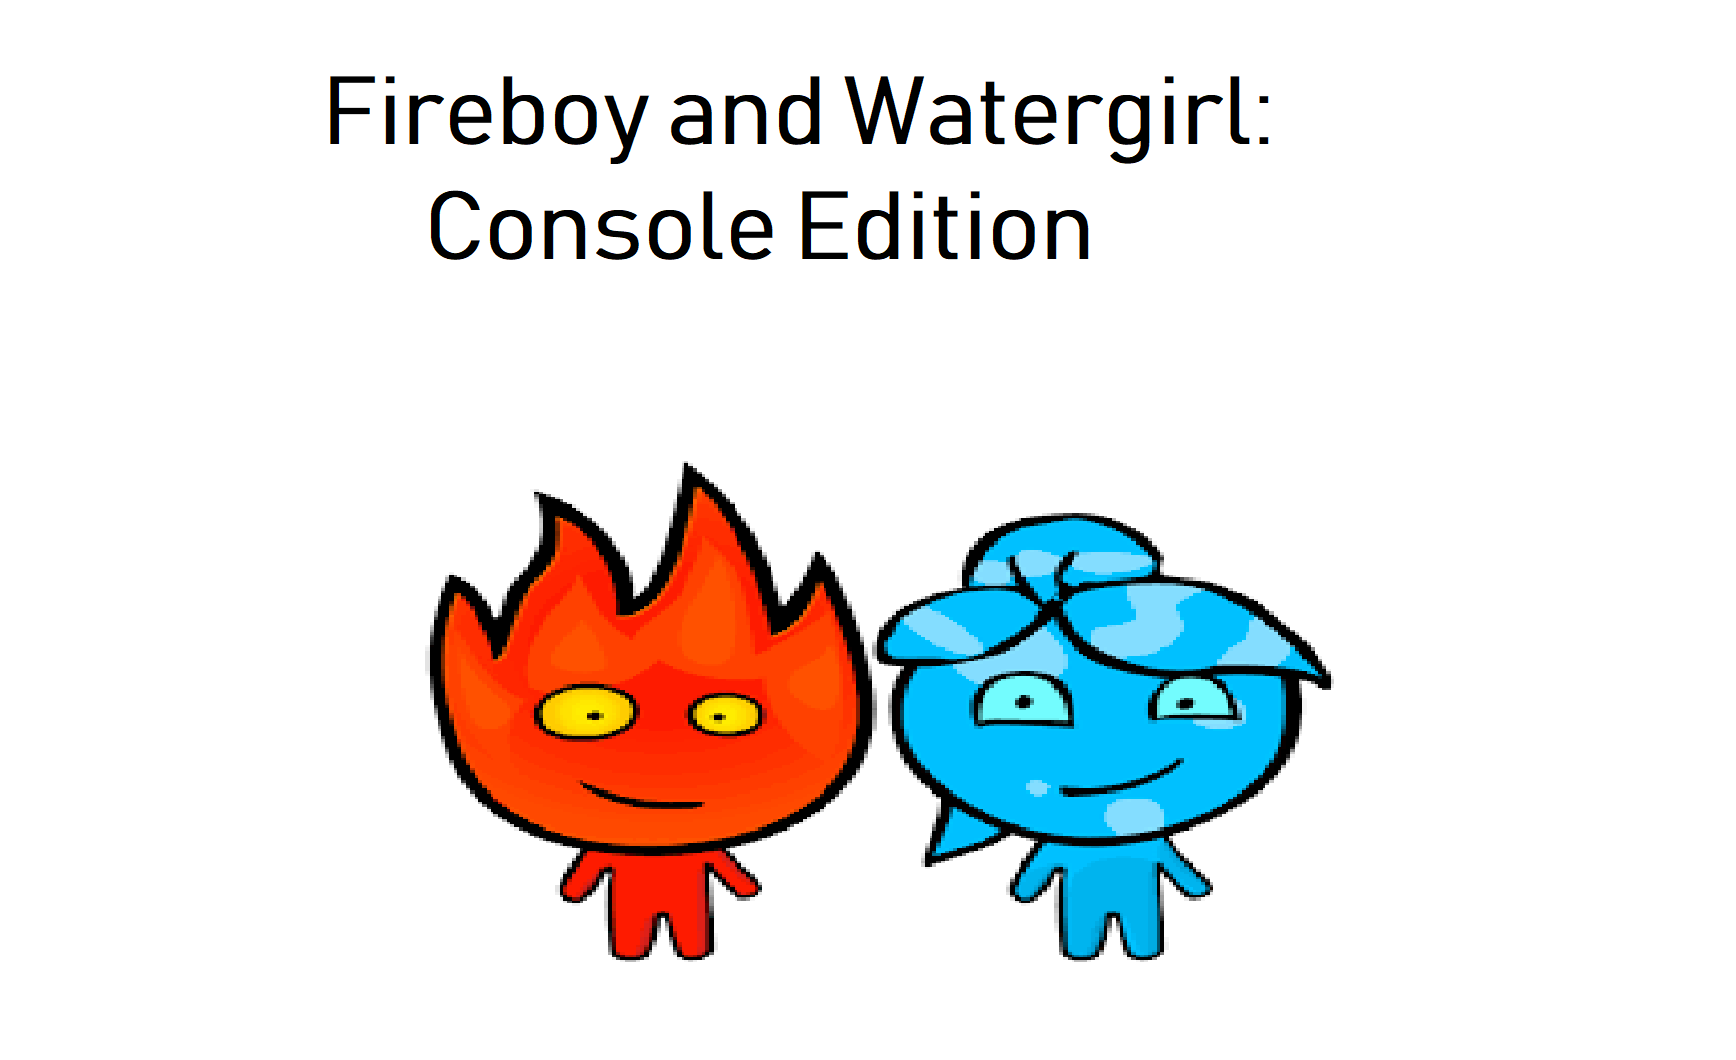 Fireboy and Watergirl - Play on